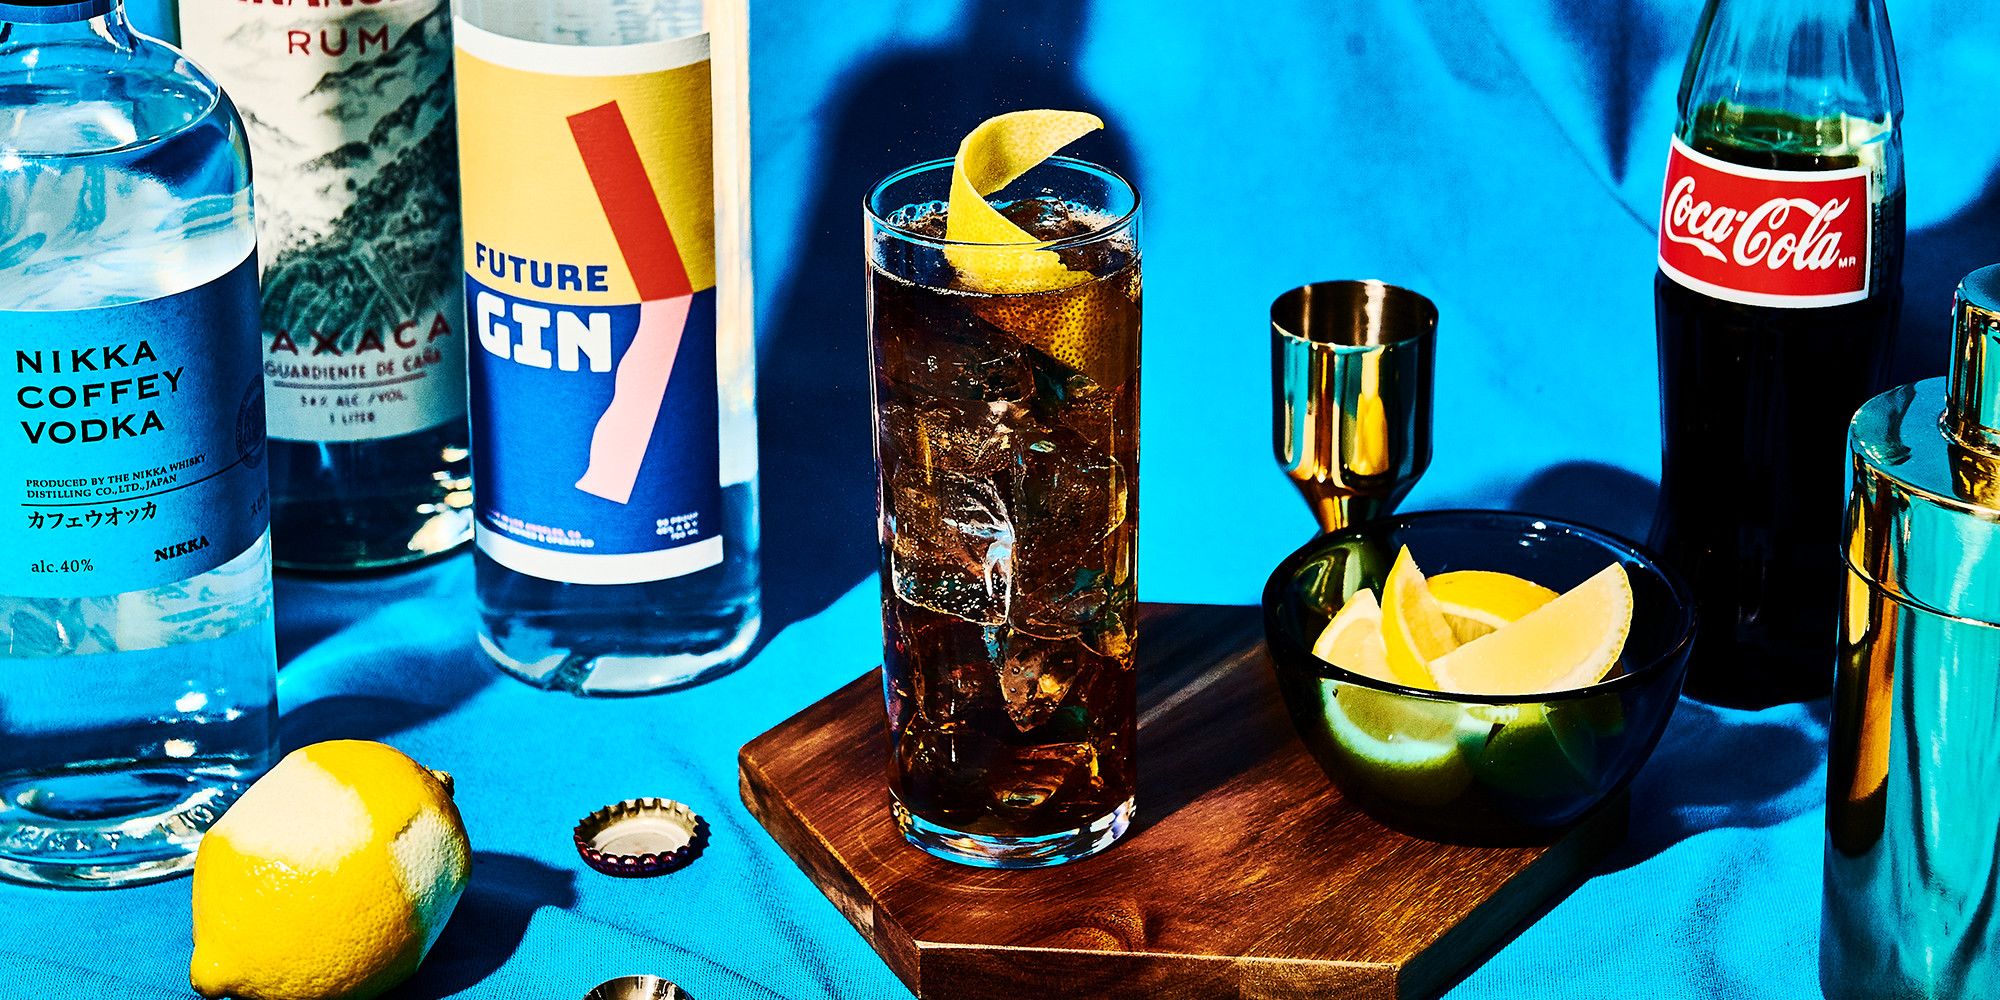 Long Island Ice Tea Cocktail : Recipe, instructions and reviews 